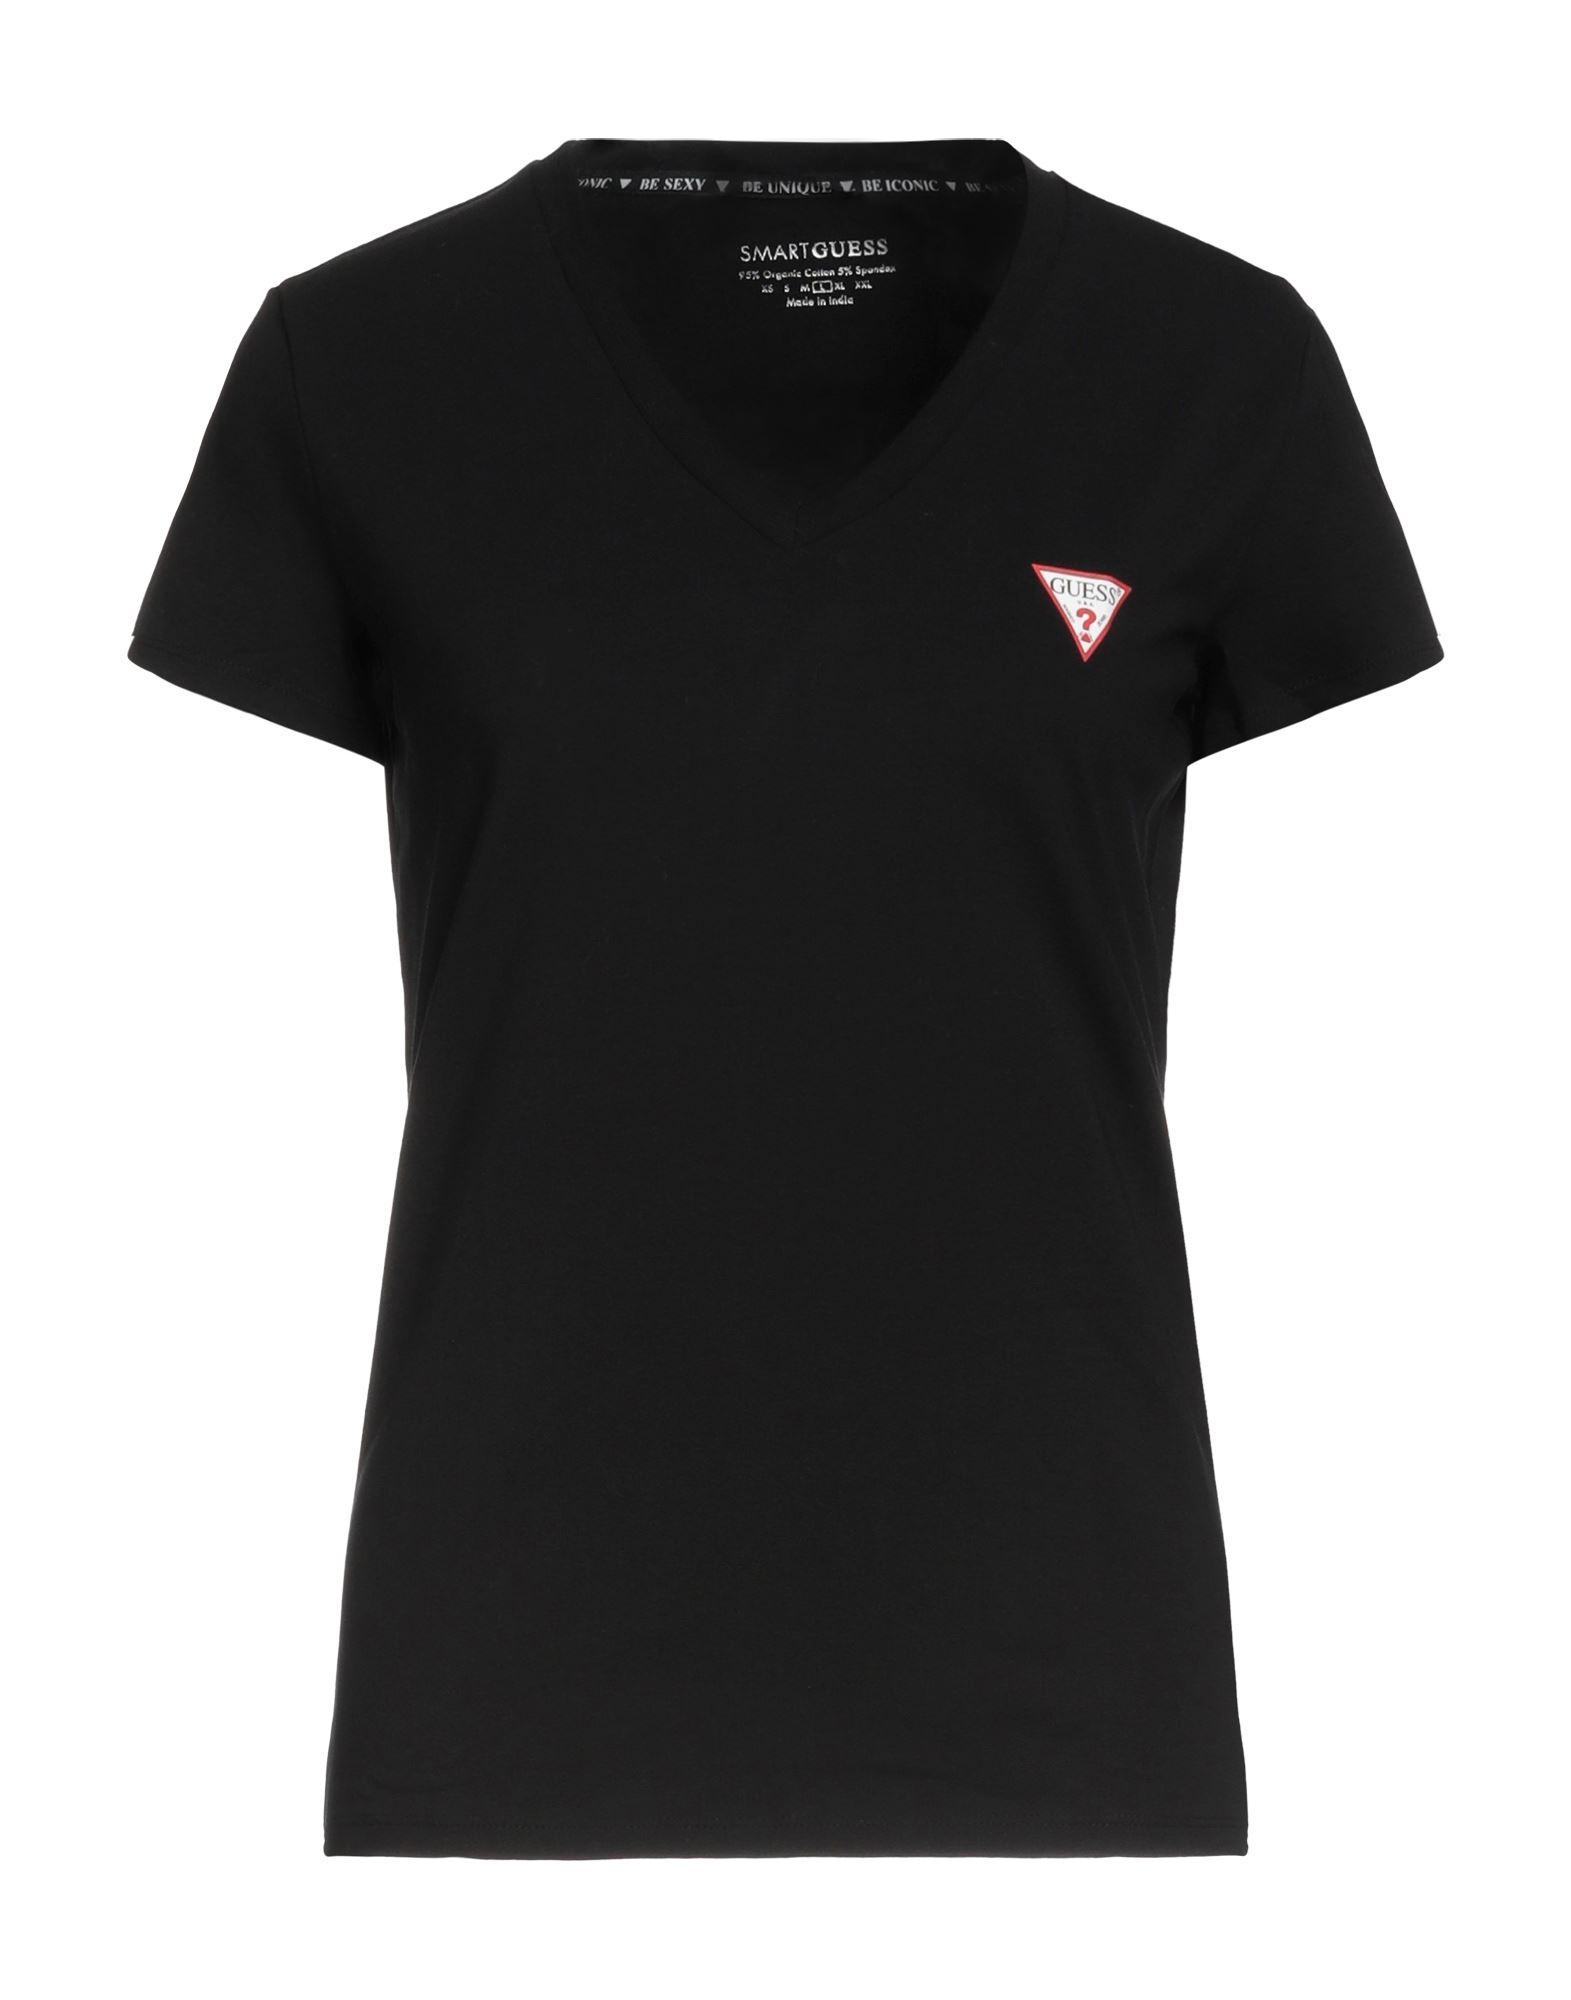 Guess T-shirts In Black